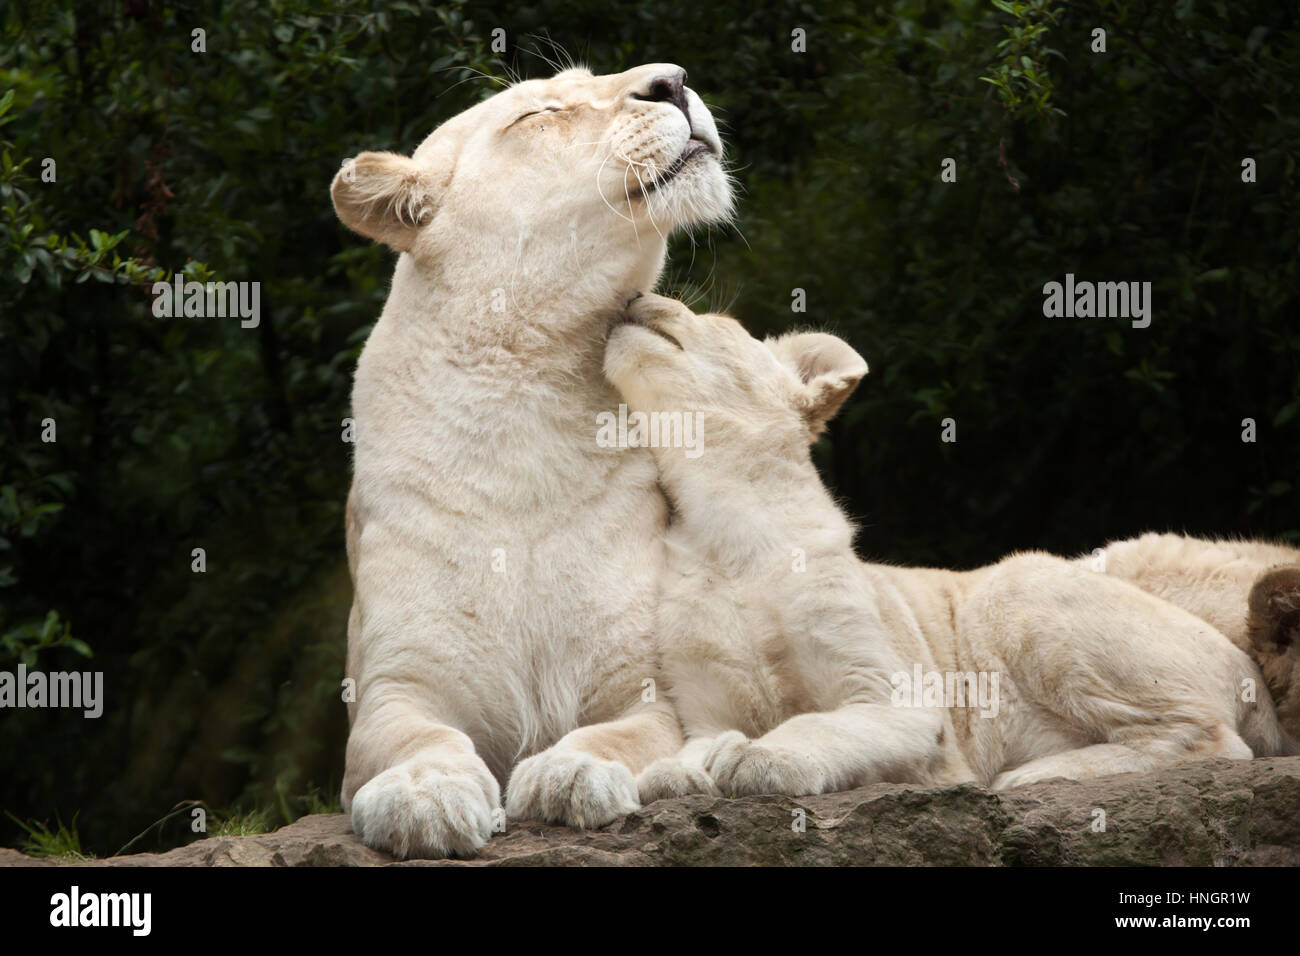 Female white lion with two newborn lion cubs at La Fleche Zoo in the Loire Valley, France. The white lion is a colour mutation of the Transvaal lion (Panthera leo krugeri), also known as the Southeast African lion or Kalahari lion. Two white lion cubs were born on December 2, 2015. Stock Photo